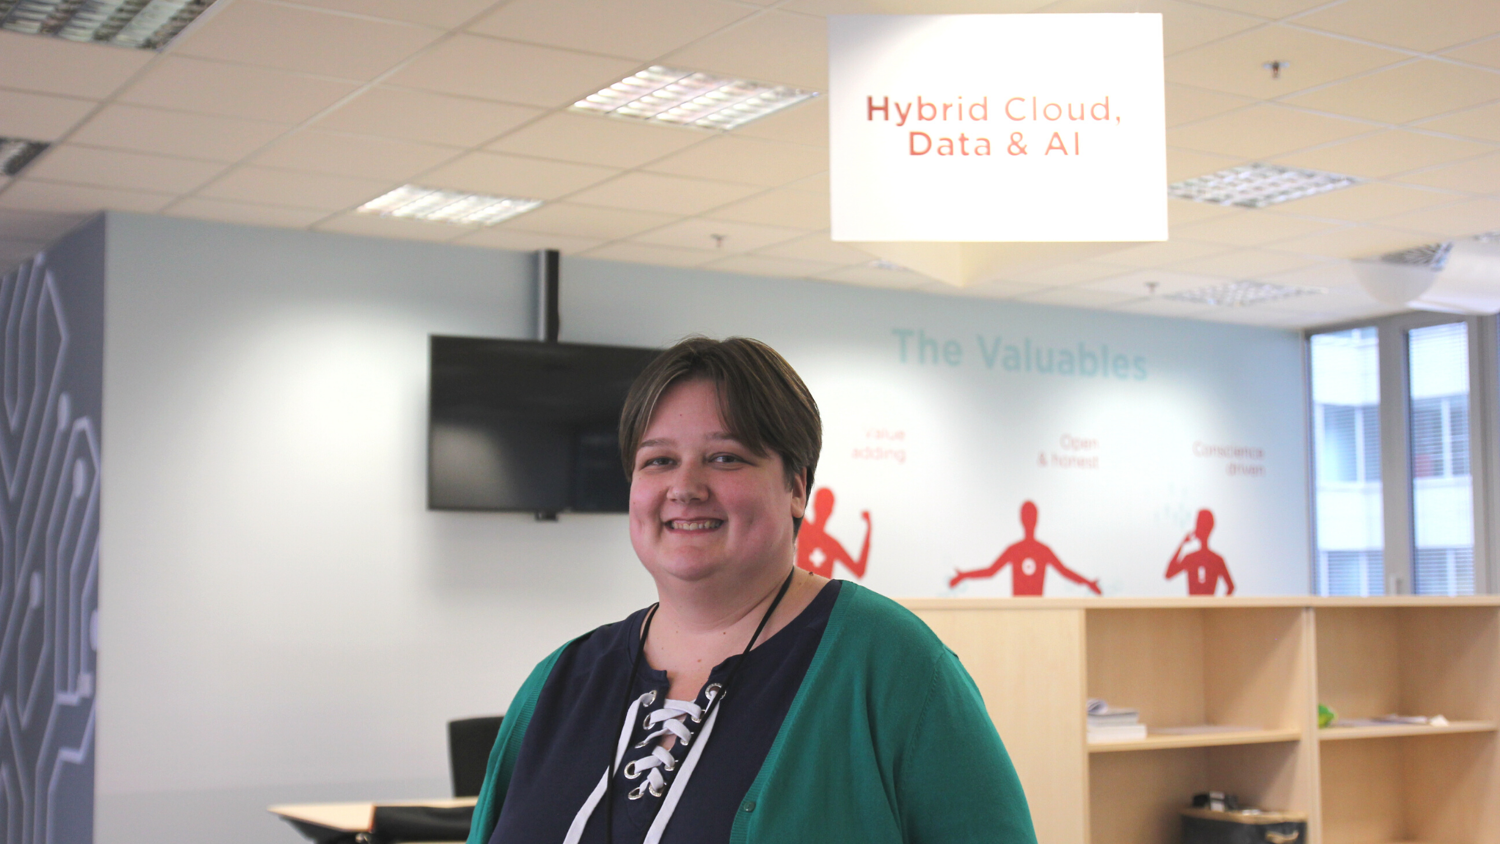 Meet Tijana, Manager of Hybrid Cloud, Data & AI, and .NET Developers based in NNIT Czech Republic